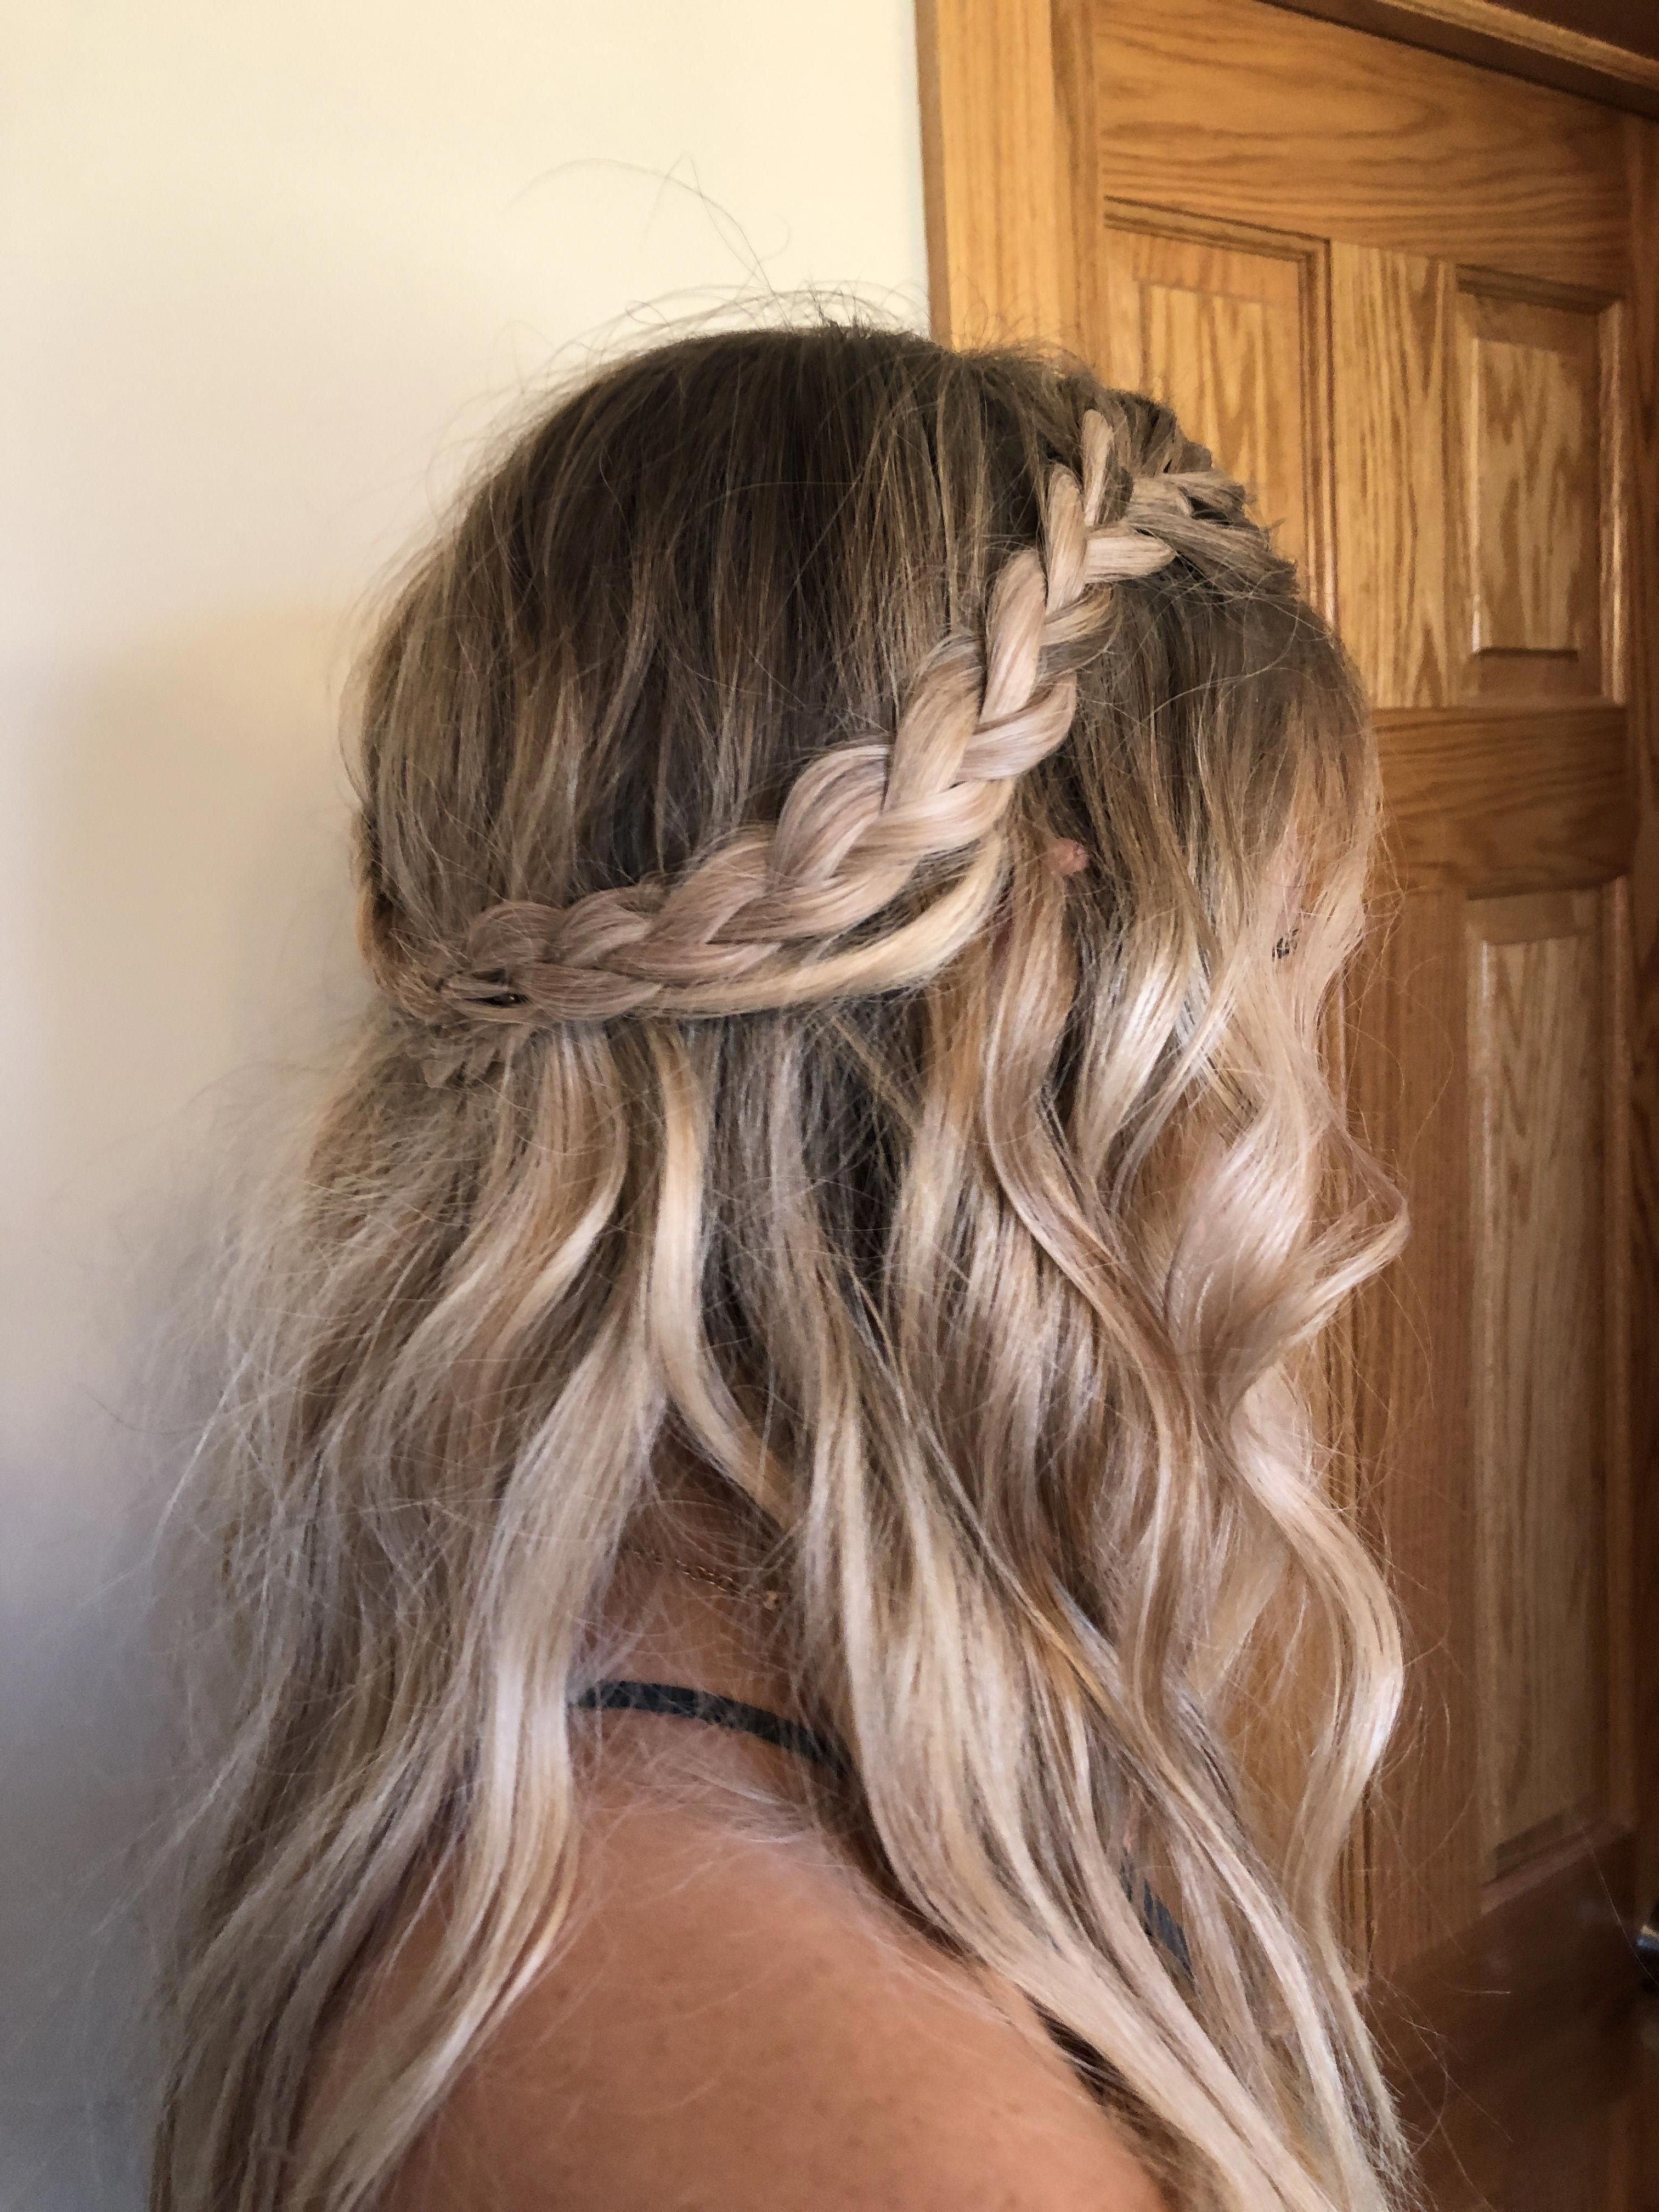 Most Recent Half Up, Half Down Braided Hairstyles Within Braided Half Up Half Down Hairstyle (View 8 of 20)